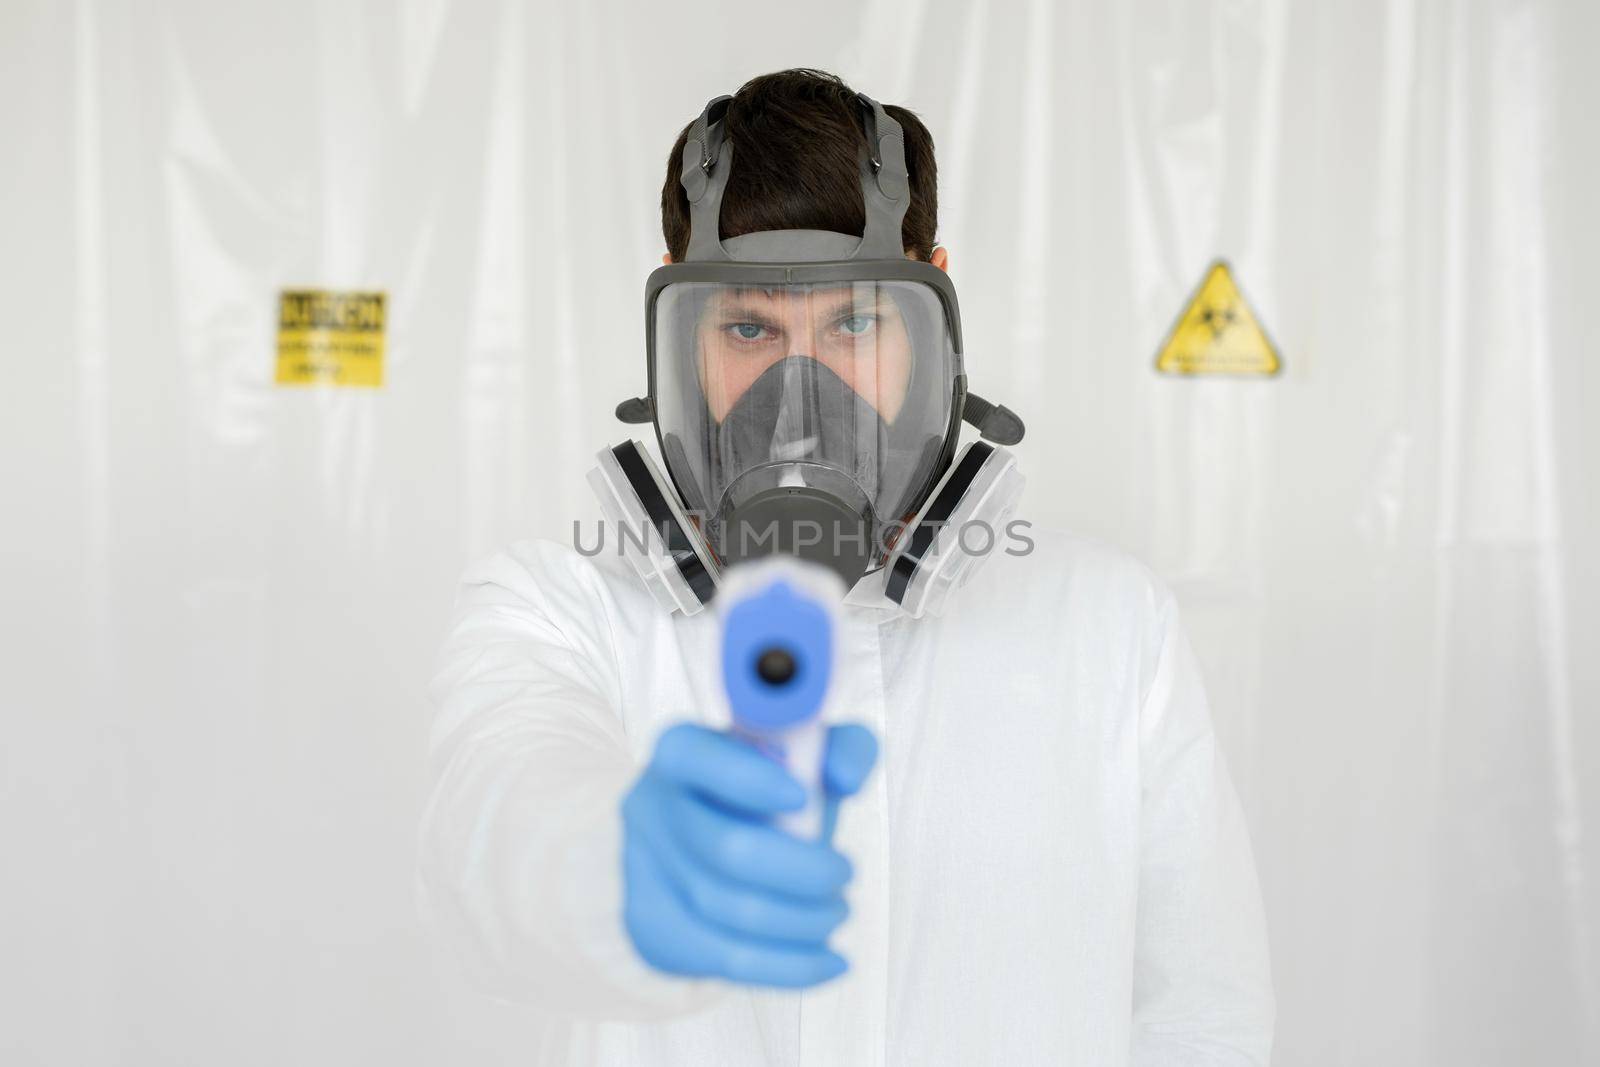 Doctor wearing protective mask ready to use infrared forehead thermometer to check body temperature for virus symptoms - epidemic virus outbreak concept. Coronavirus.Thermometer gun by StudioPeace